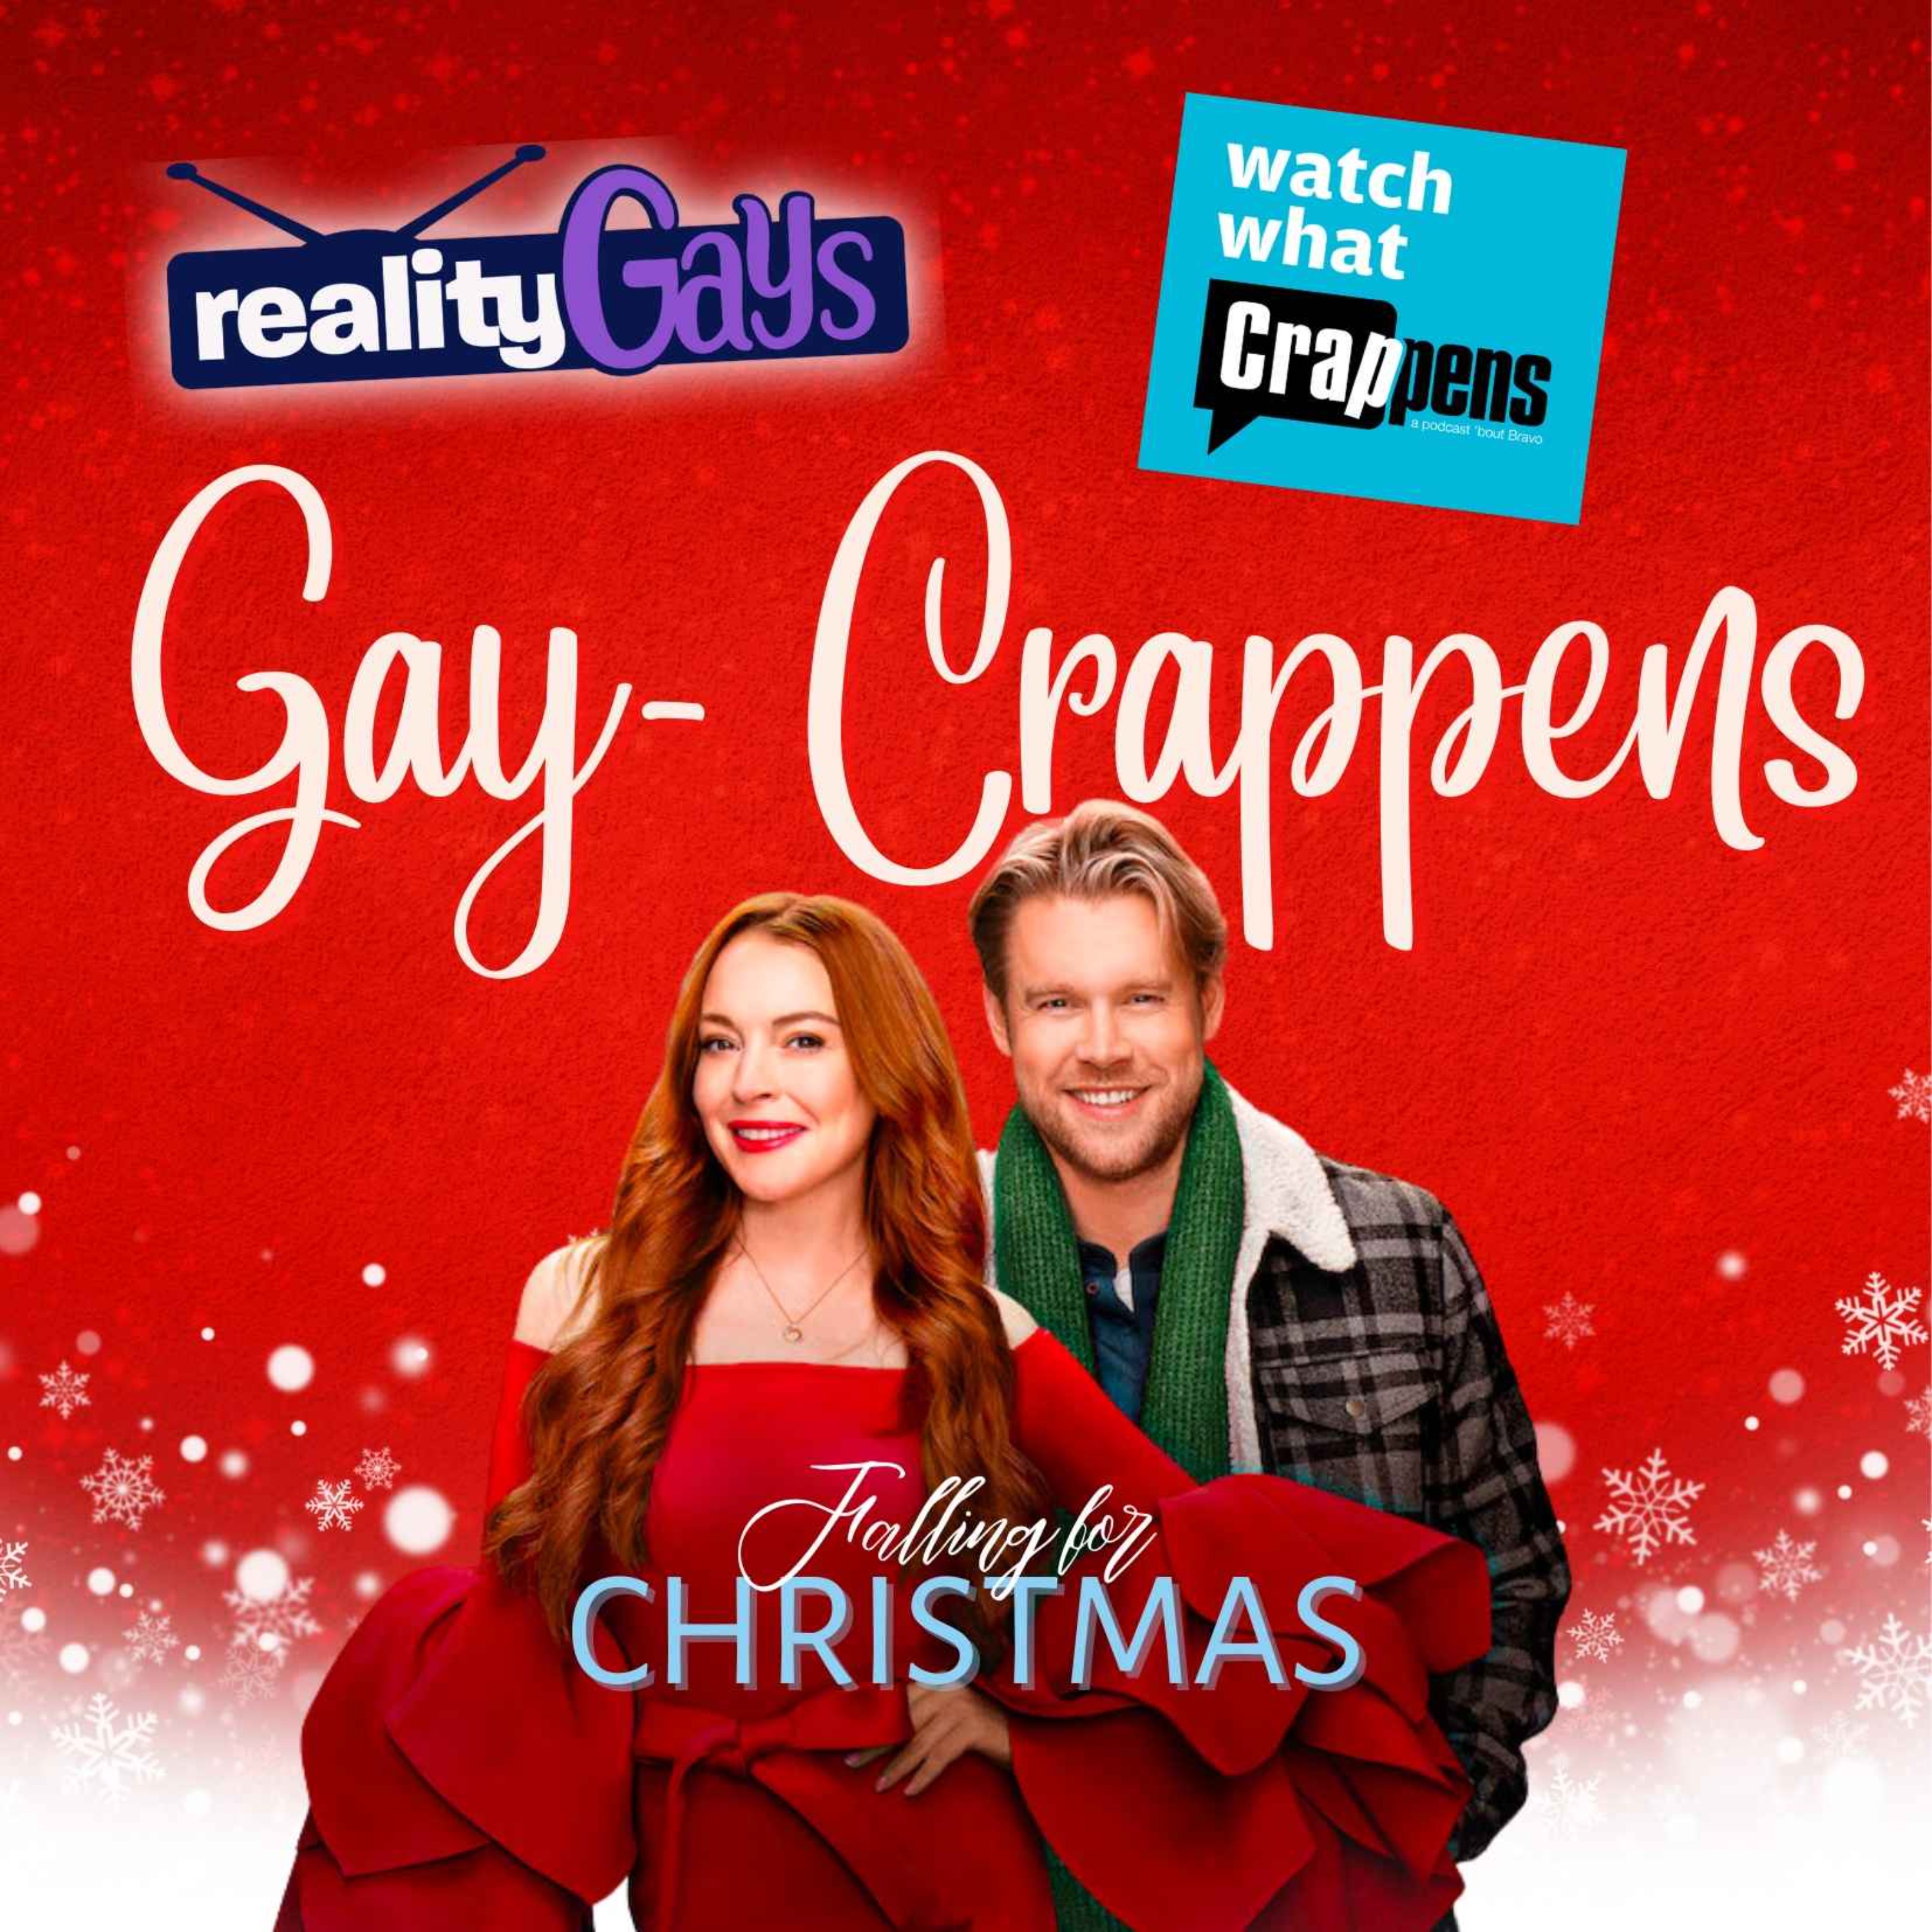 Reality Gays: Trash TV and GayDD with Mattie and Poodle - Gay Crappens: Falling for Christmas Part 4 of 4